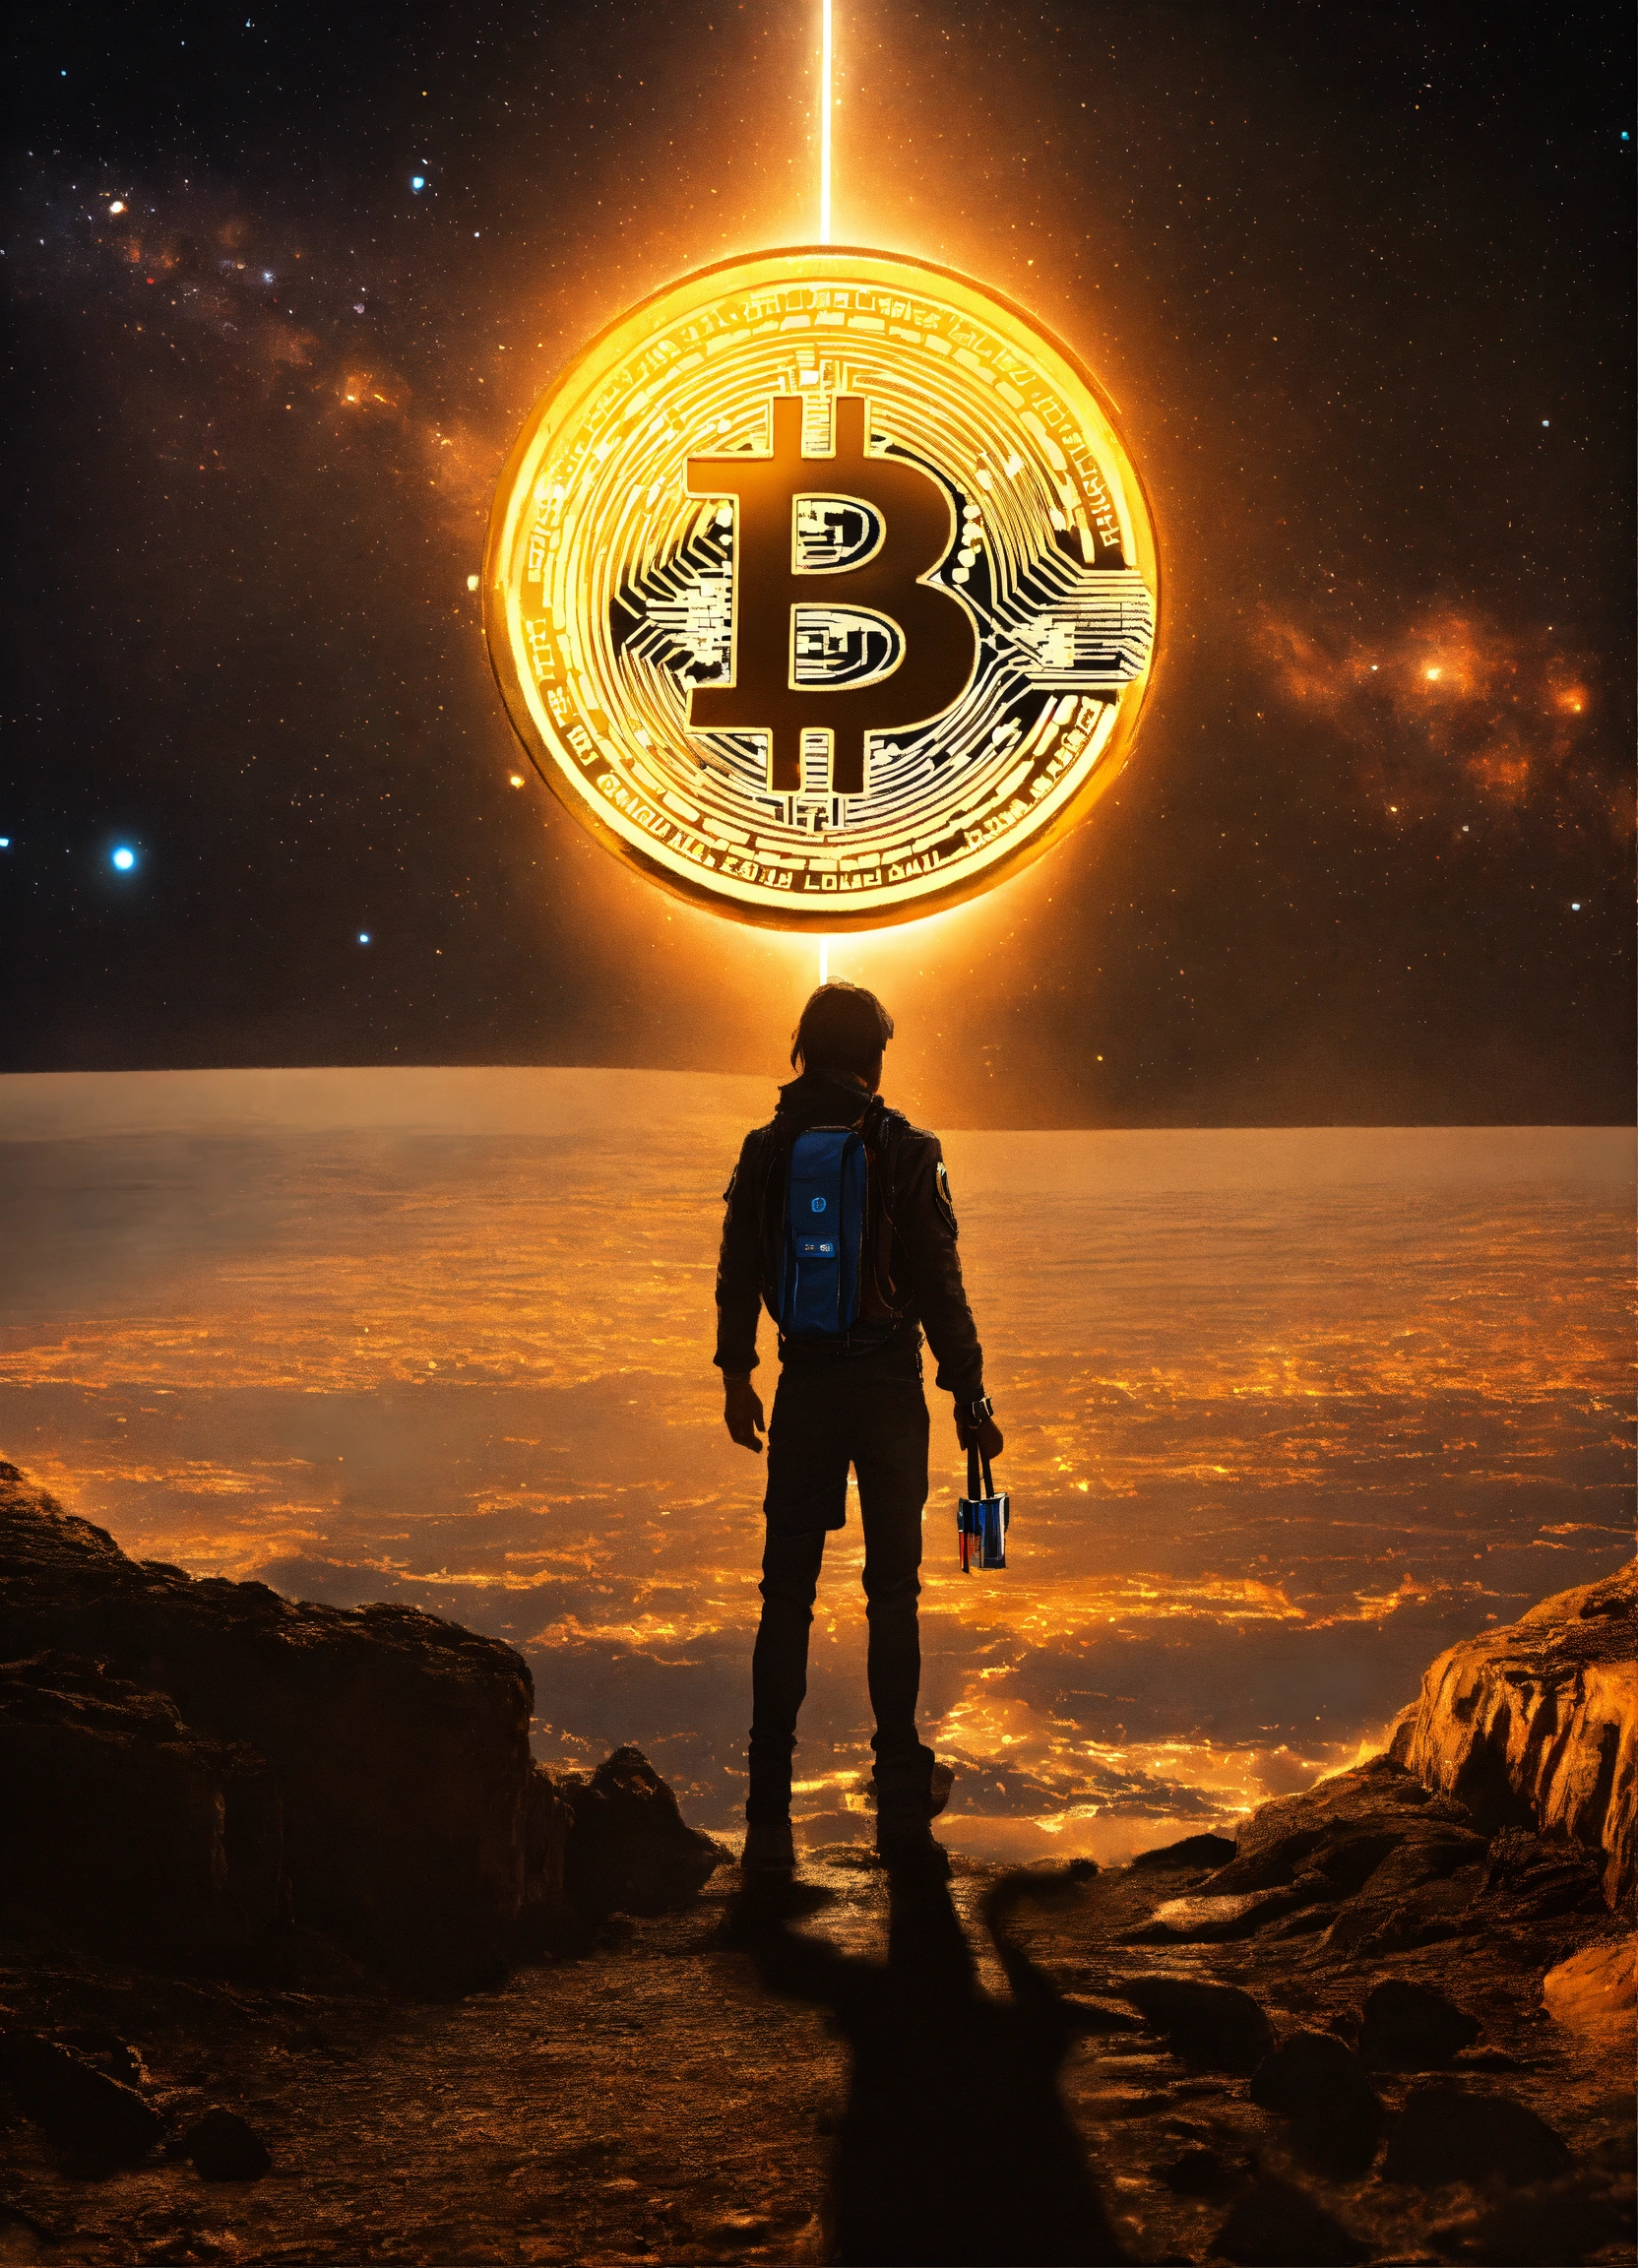 Lexica Bitcoin 20where 20the 20future 20meets 20infinity 20 F0 9f 9a